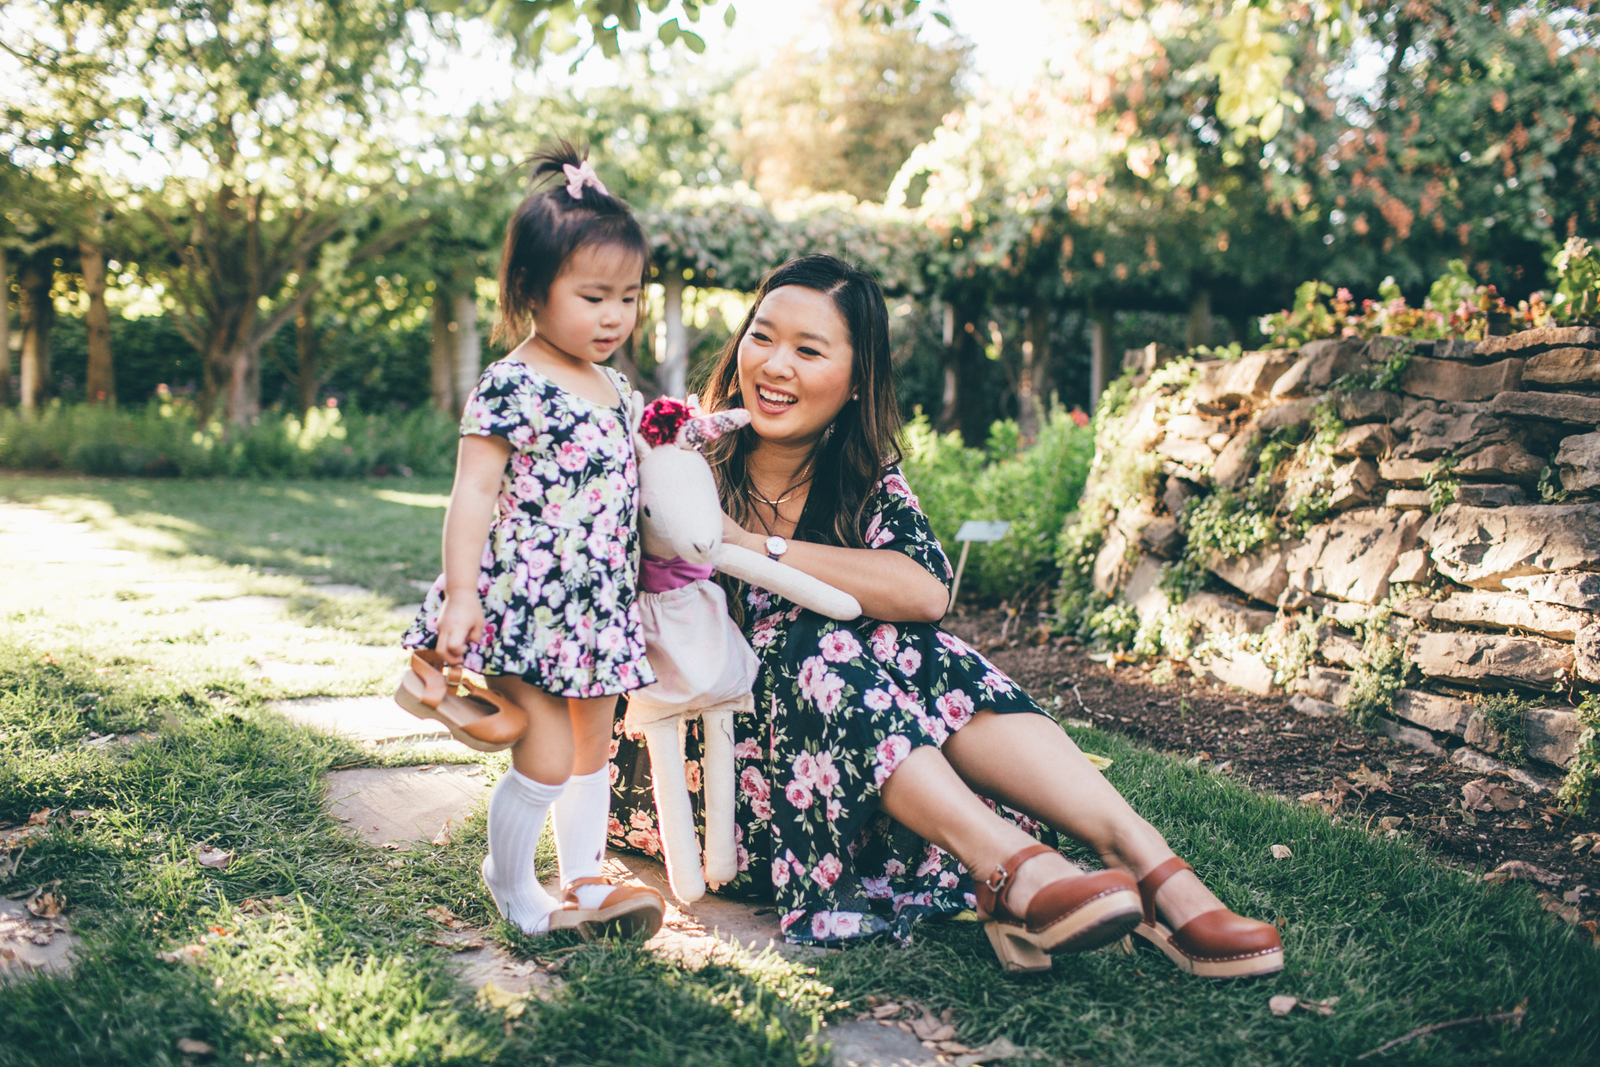 Mommy and Me Outfits: Black & Pink Floral Dresses by Sandy A La Mode